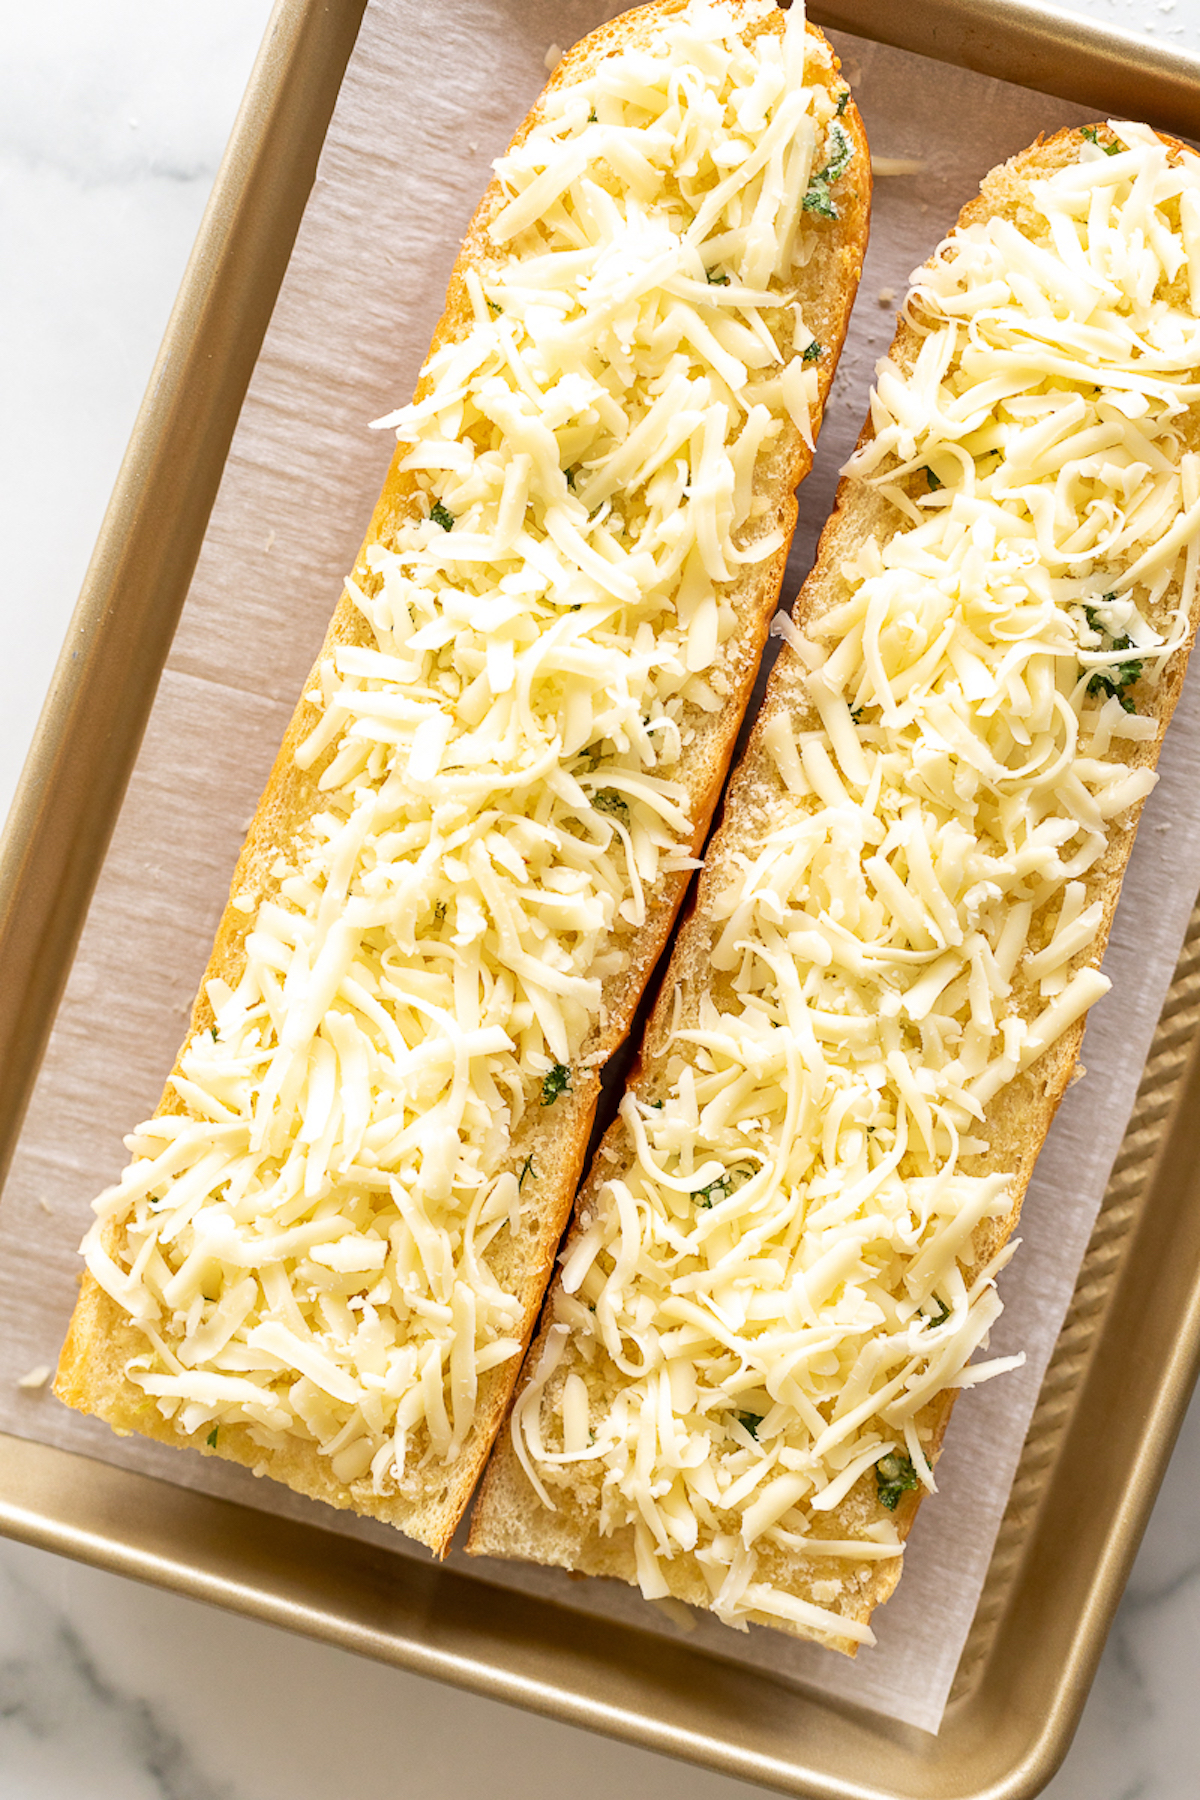 Garlic cheese bread with shredded cheese on a baking tray ready to be cooked.